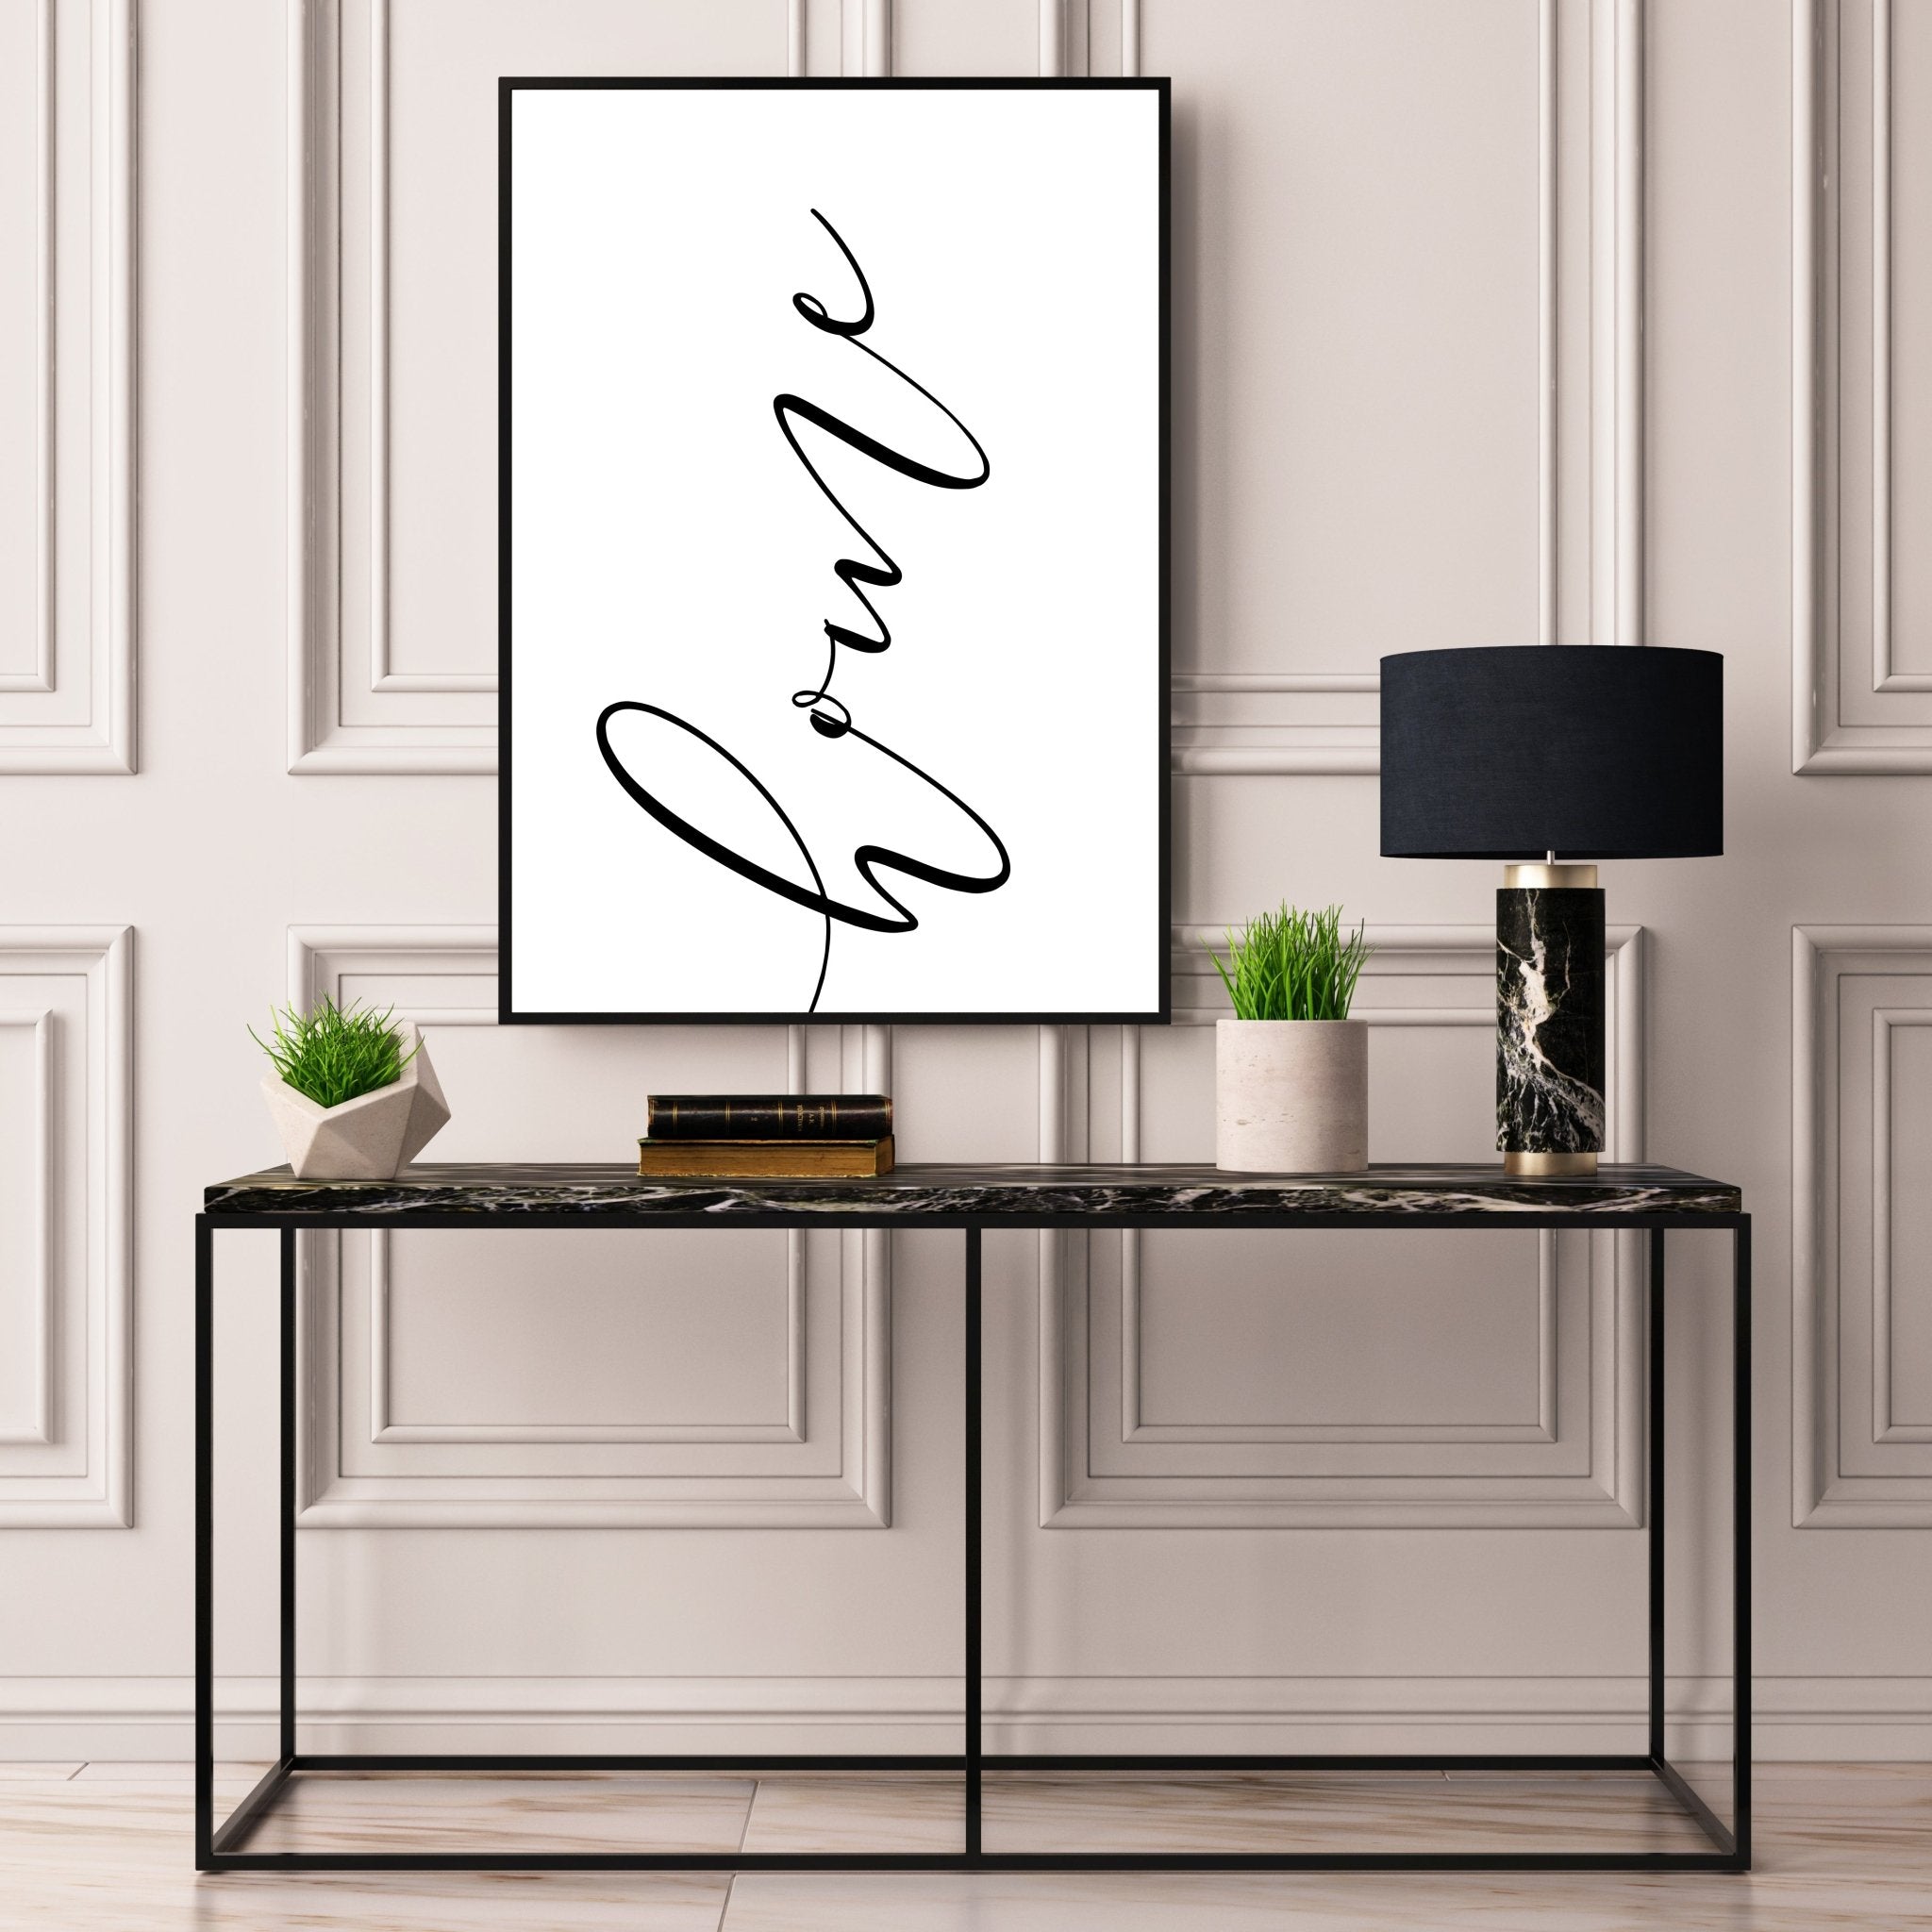 Home - D'Luxe Prints